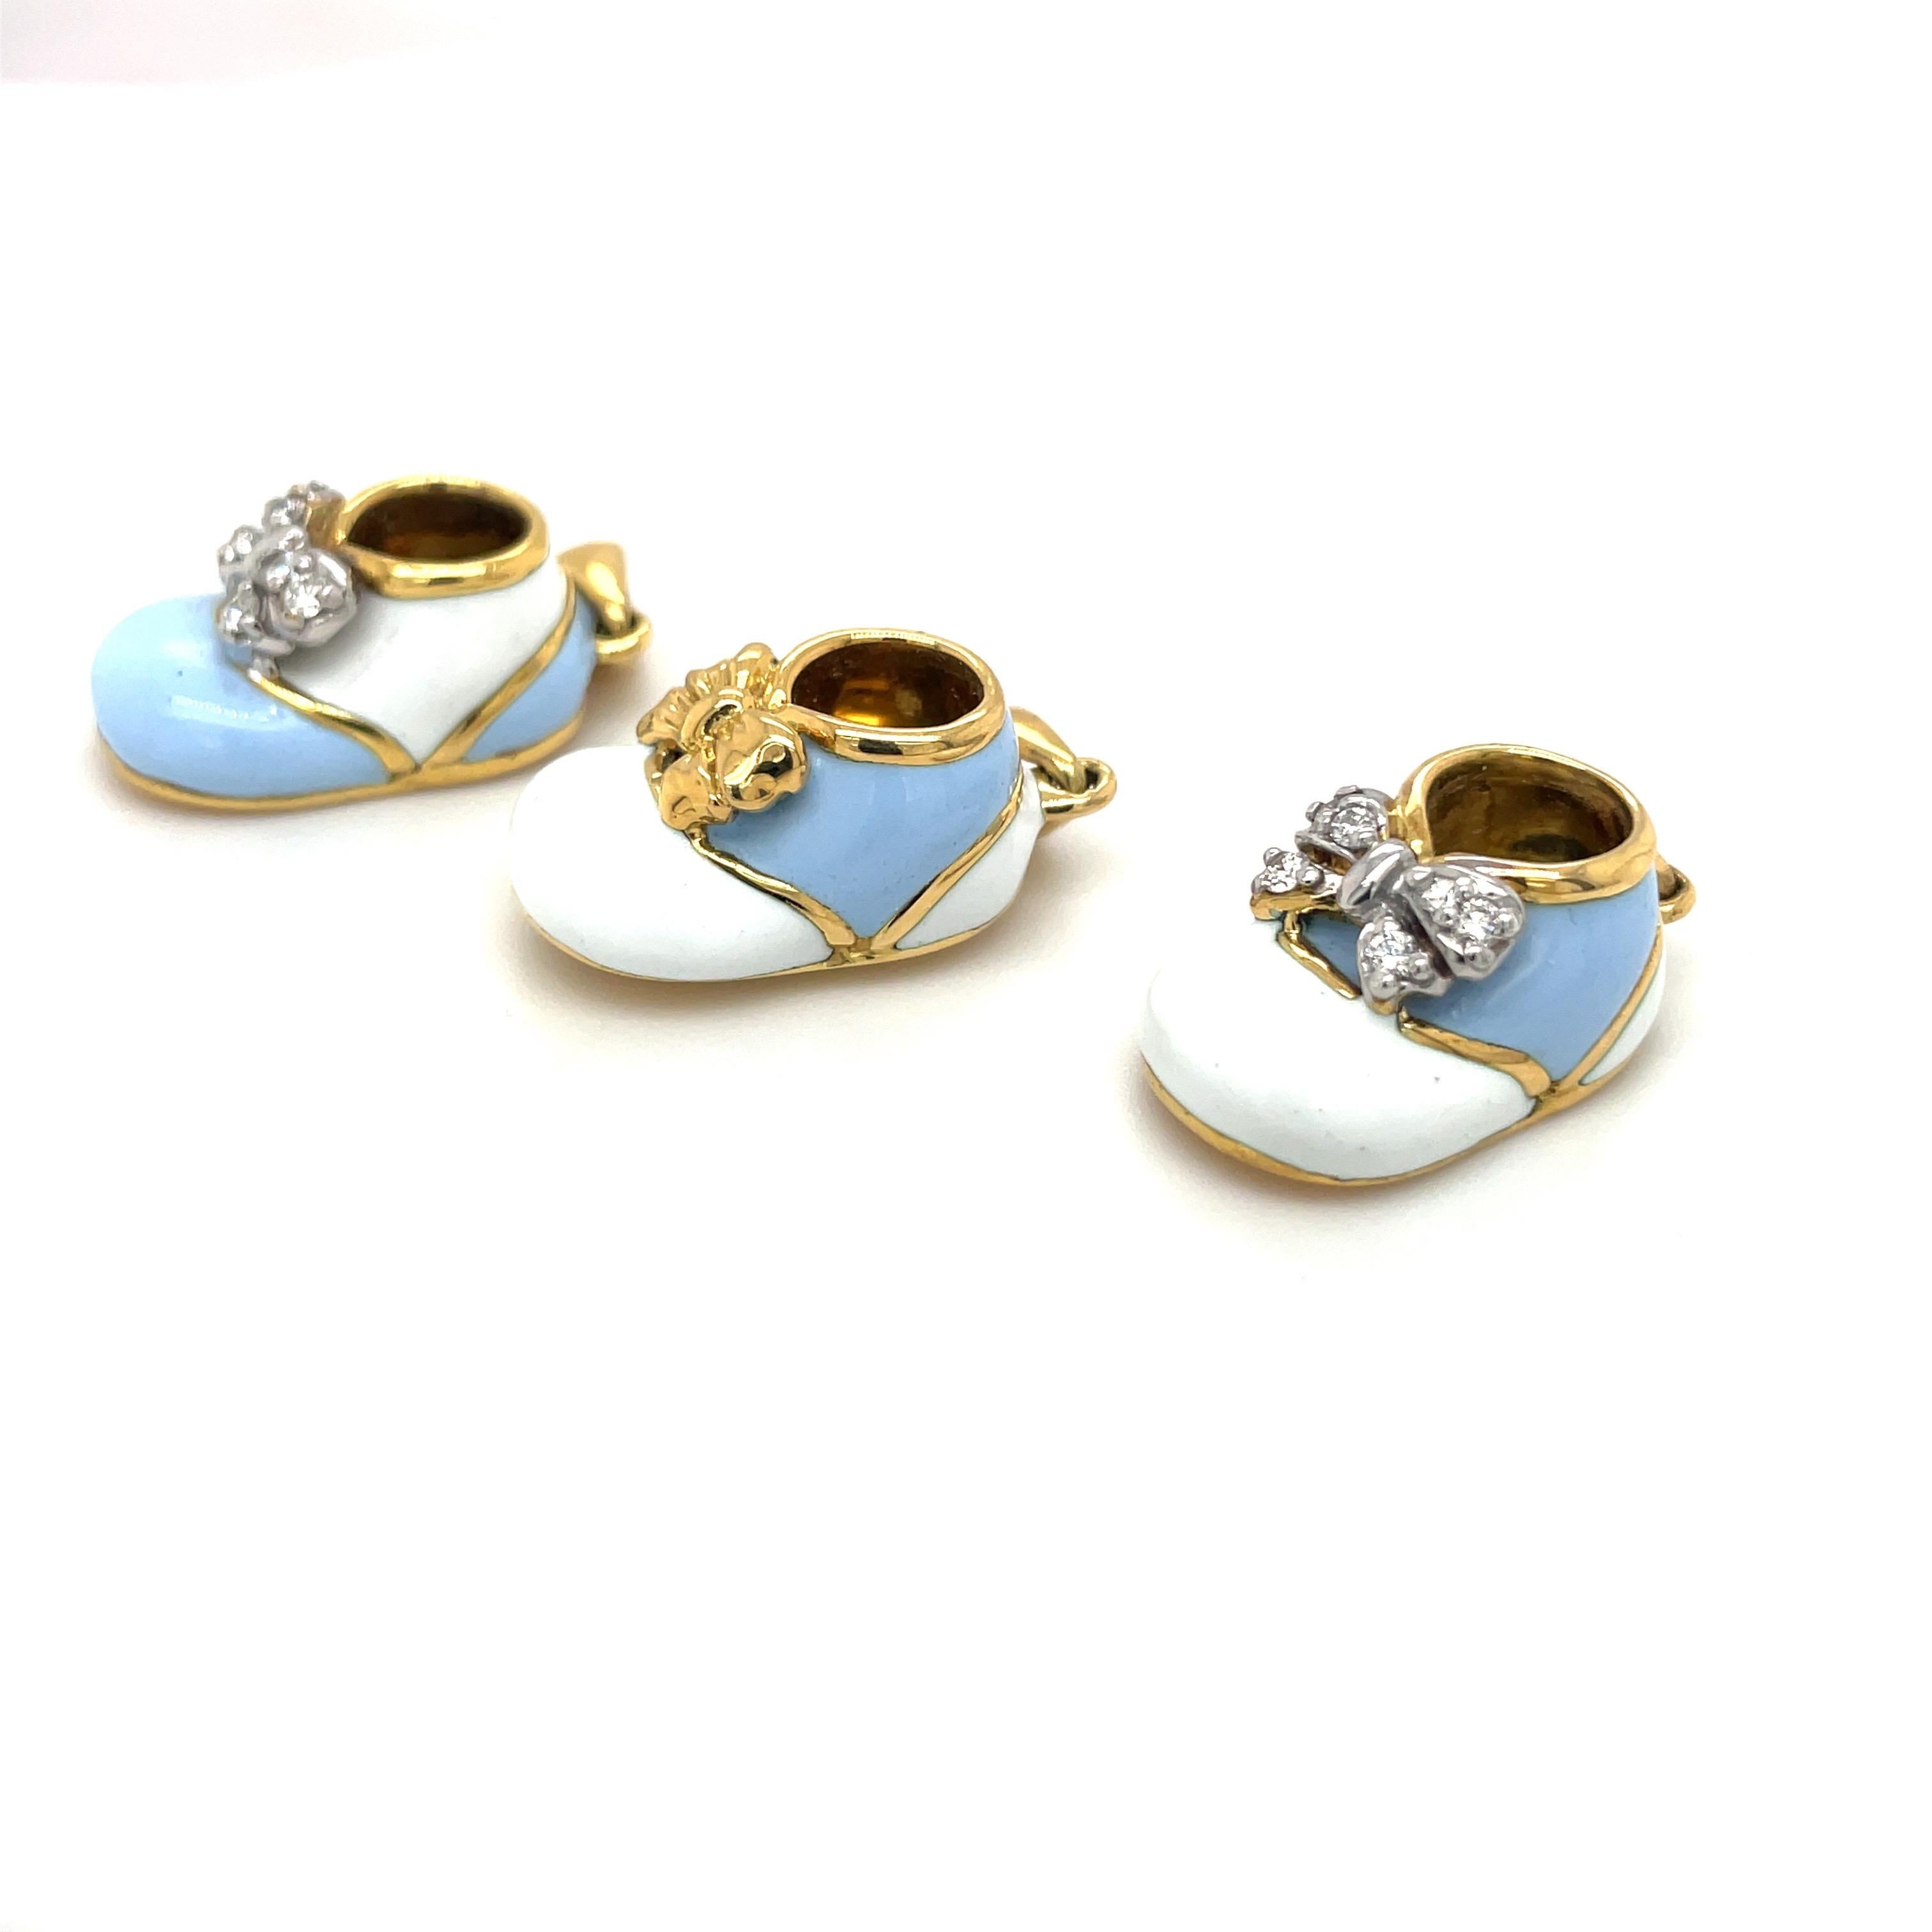 Round Cut 18KT Yellow Gold Baby Shoe Light Blue/White Enamel & 0.12Ct Diamond Bow For Sale